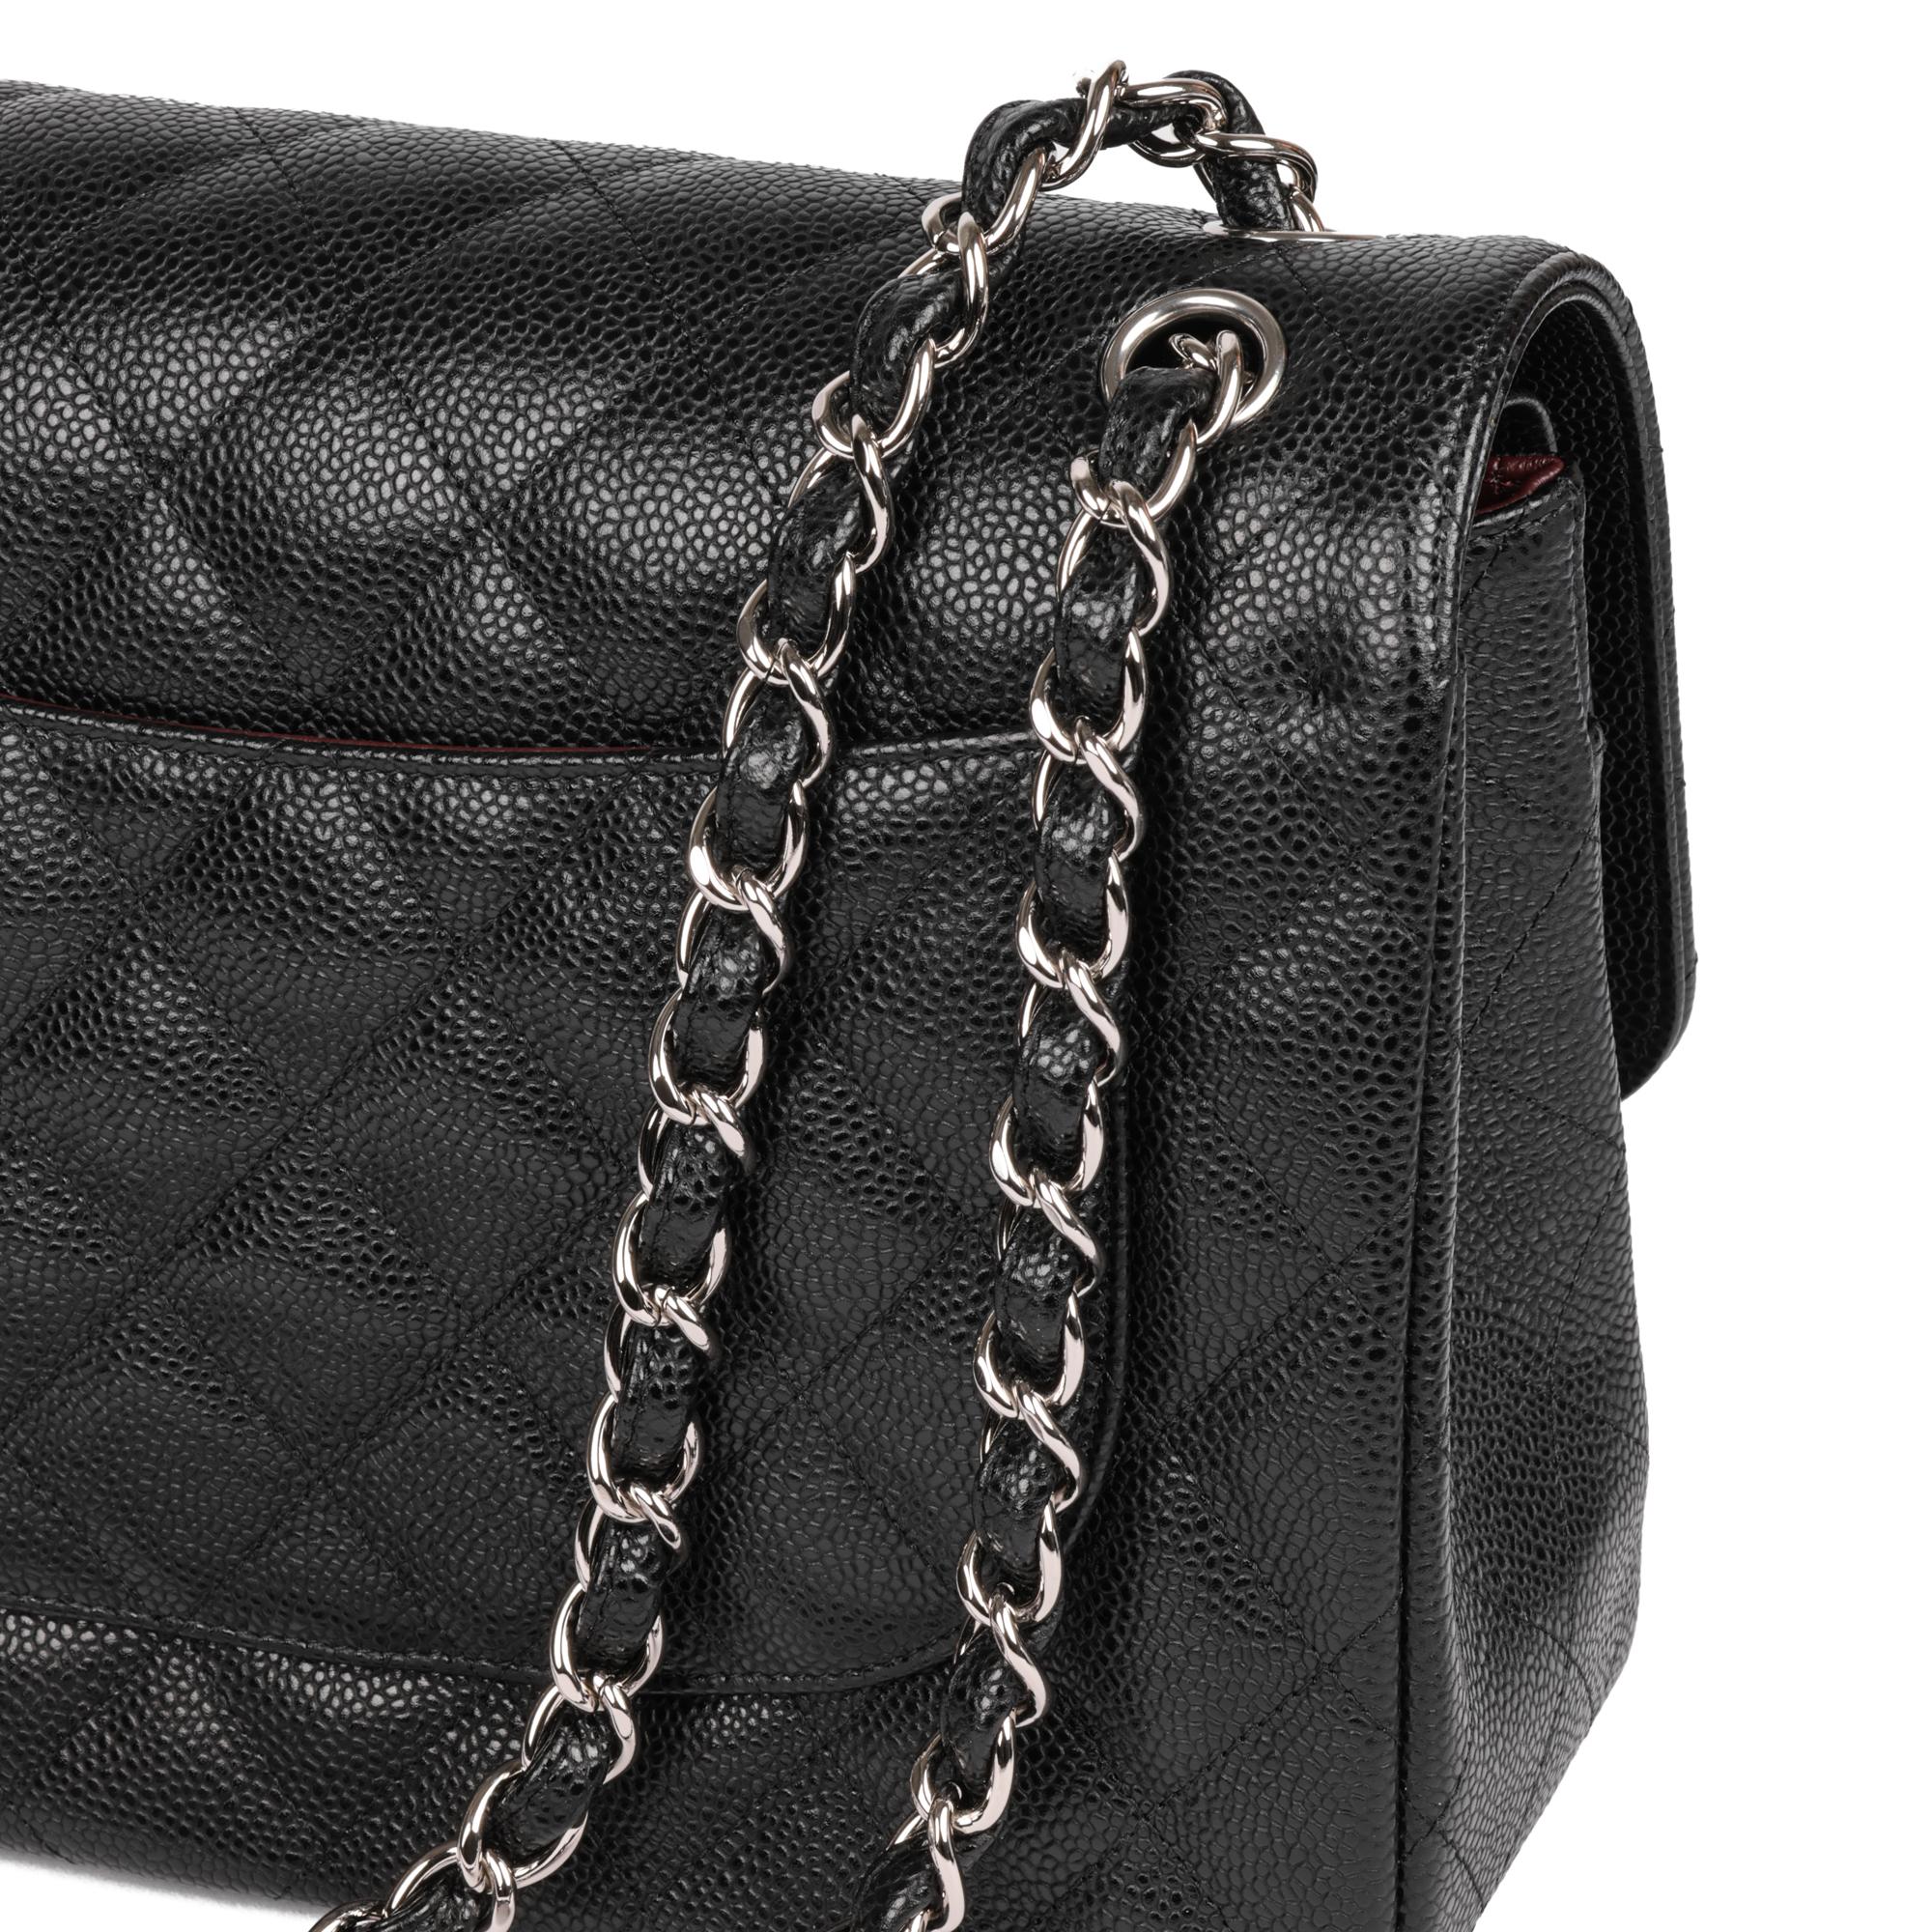 CHANEL Black Quilted Caviar Leather Jumbo Classic Double Flap Bag  4